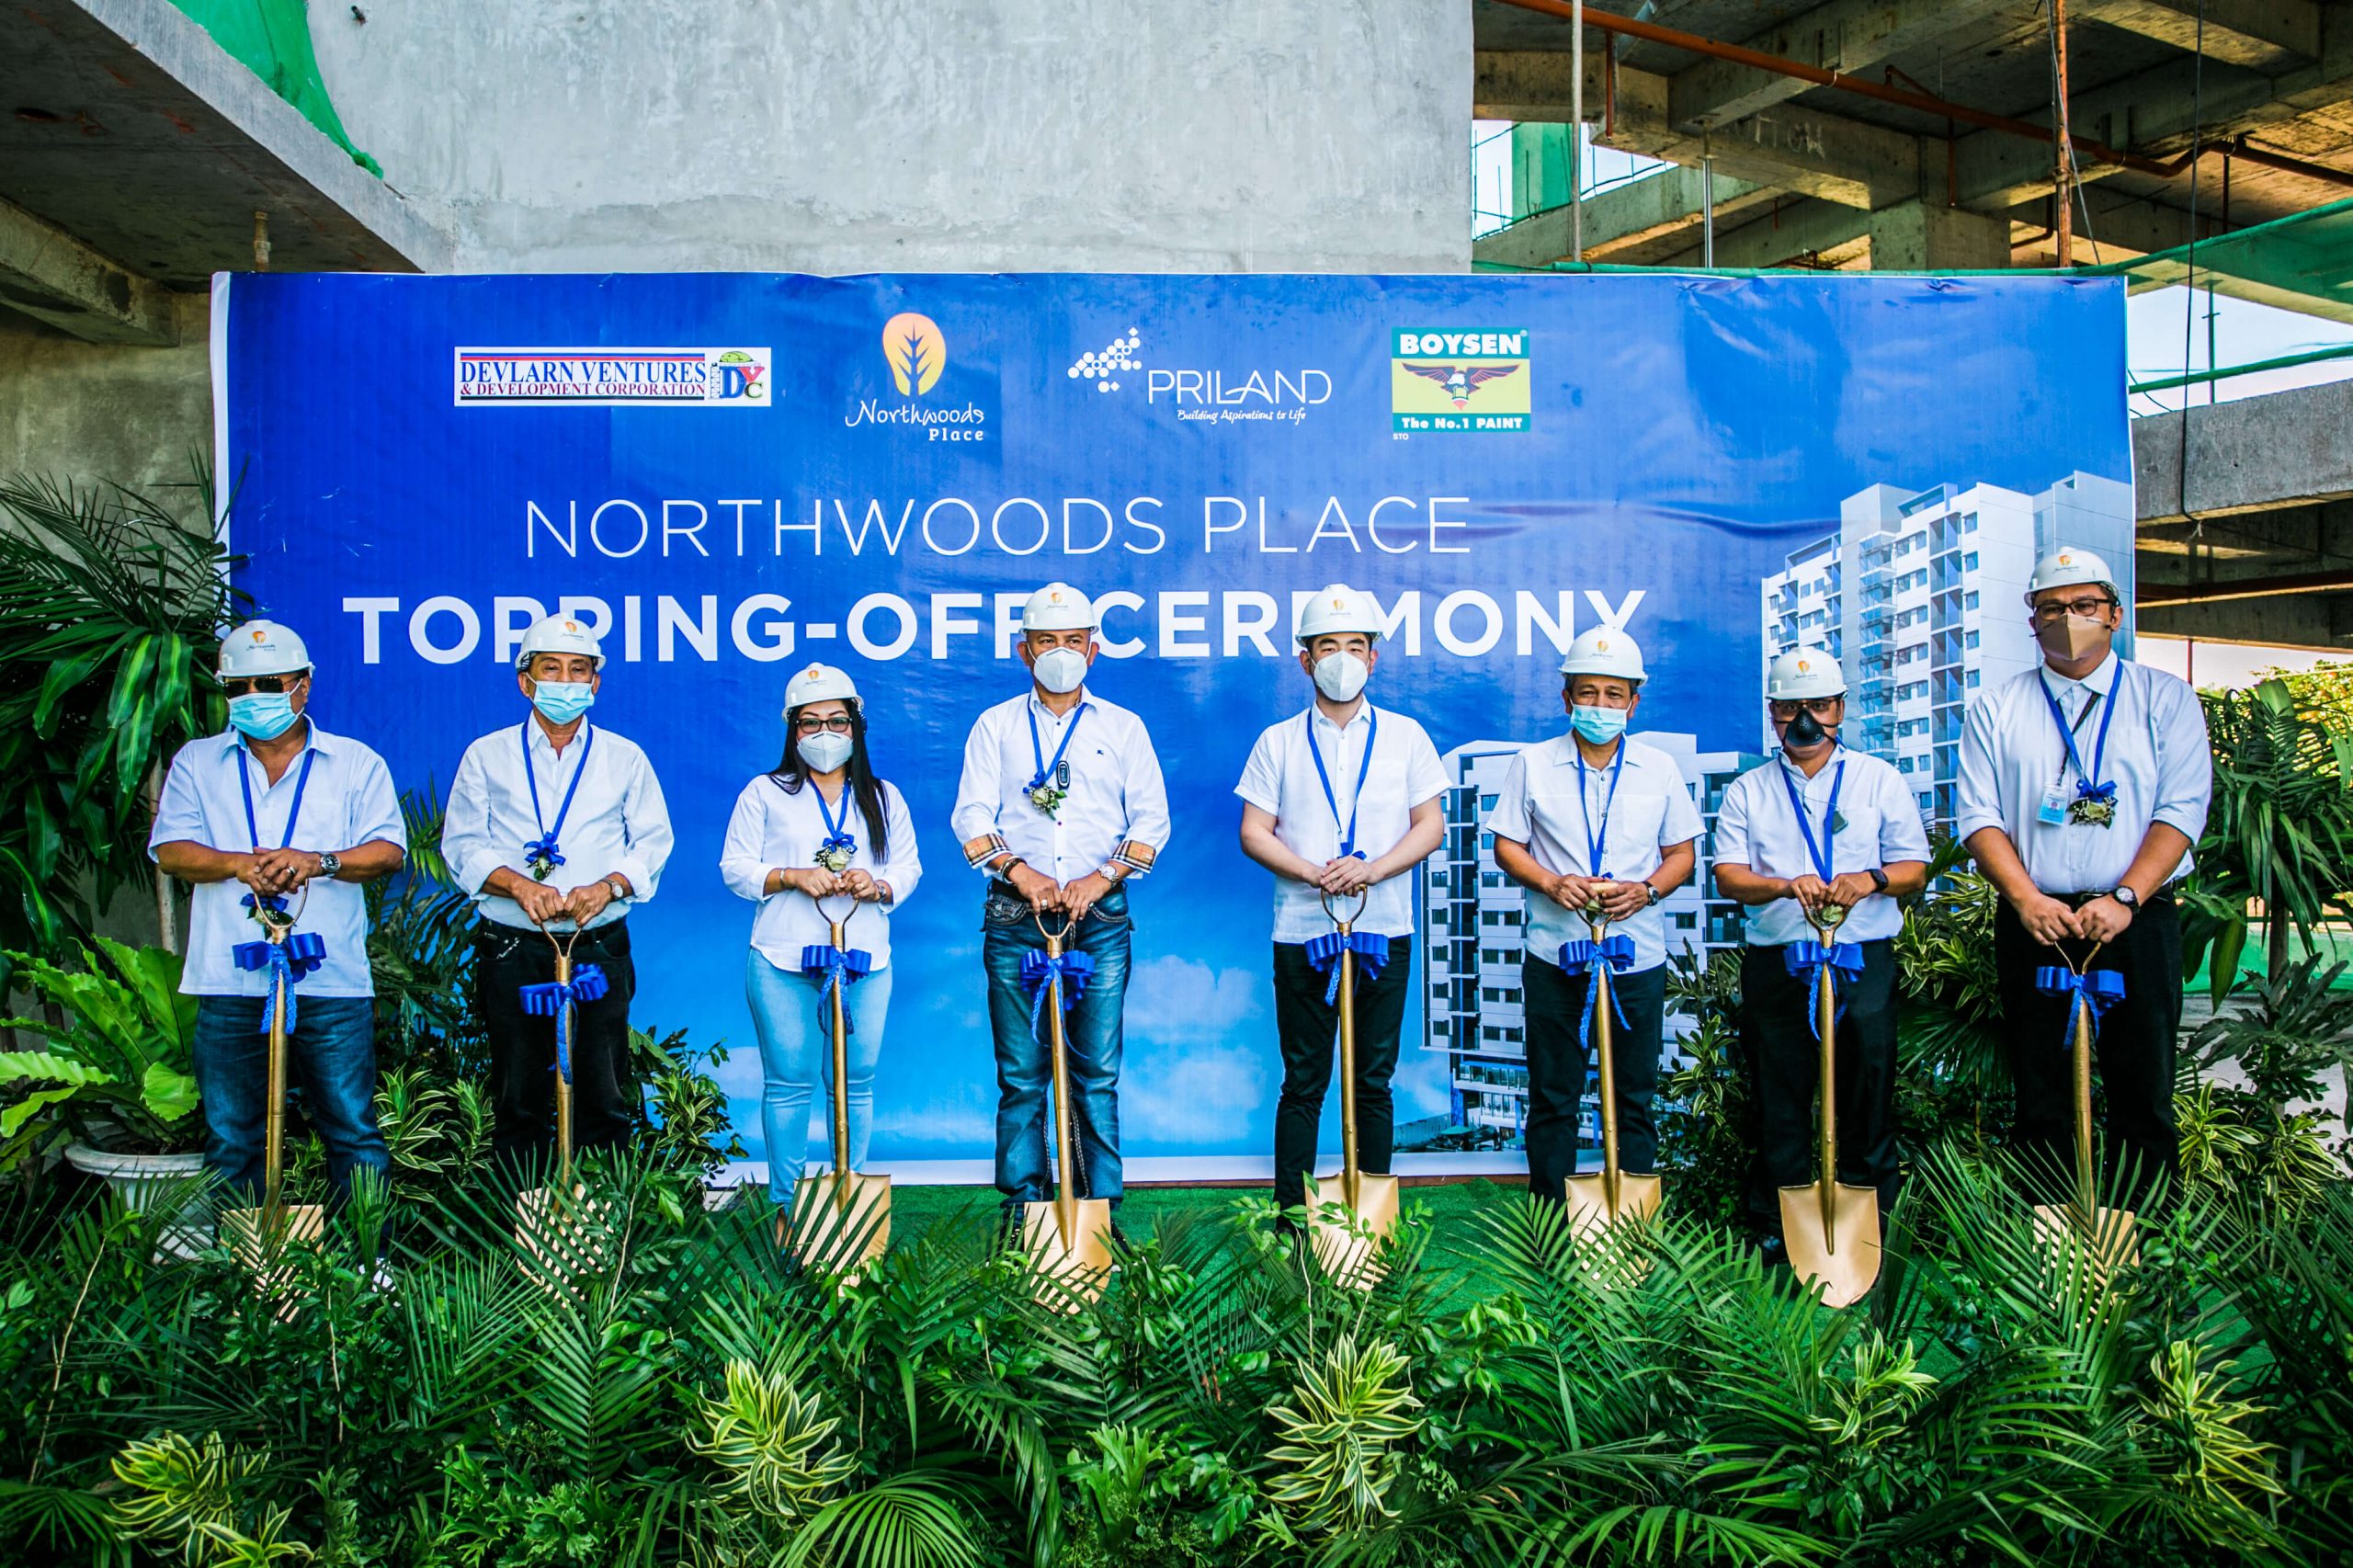 TOPPING OFF. Joining the ceremony are (from left) Reynaldo Eugenio, VP for Operations, Devlarn Ventures and Development Corporation; Eduardo Bagcat, COO; Nathalie Vargas, VP Admin and Finance; Deryl Vargas, CEO and President; Ramon Carlo Yap, President, Priland Development Corporation; Marcelino Relampagos, COO; Roy Vincent Lumayag, VP for Technical; and Dudes Tuanquin, VP for Sales and Marketing.